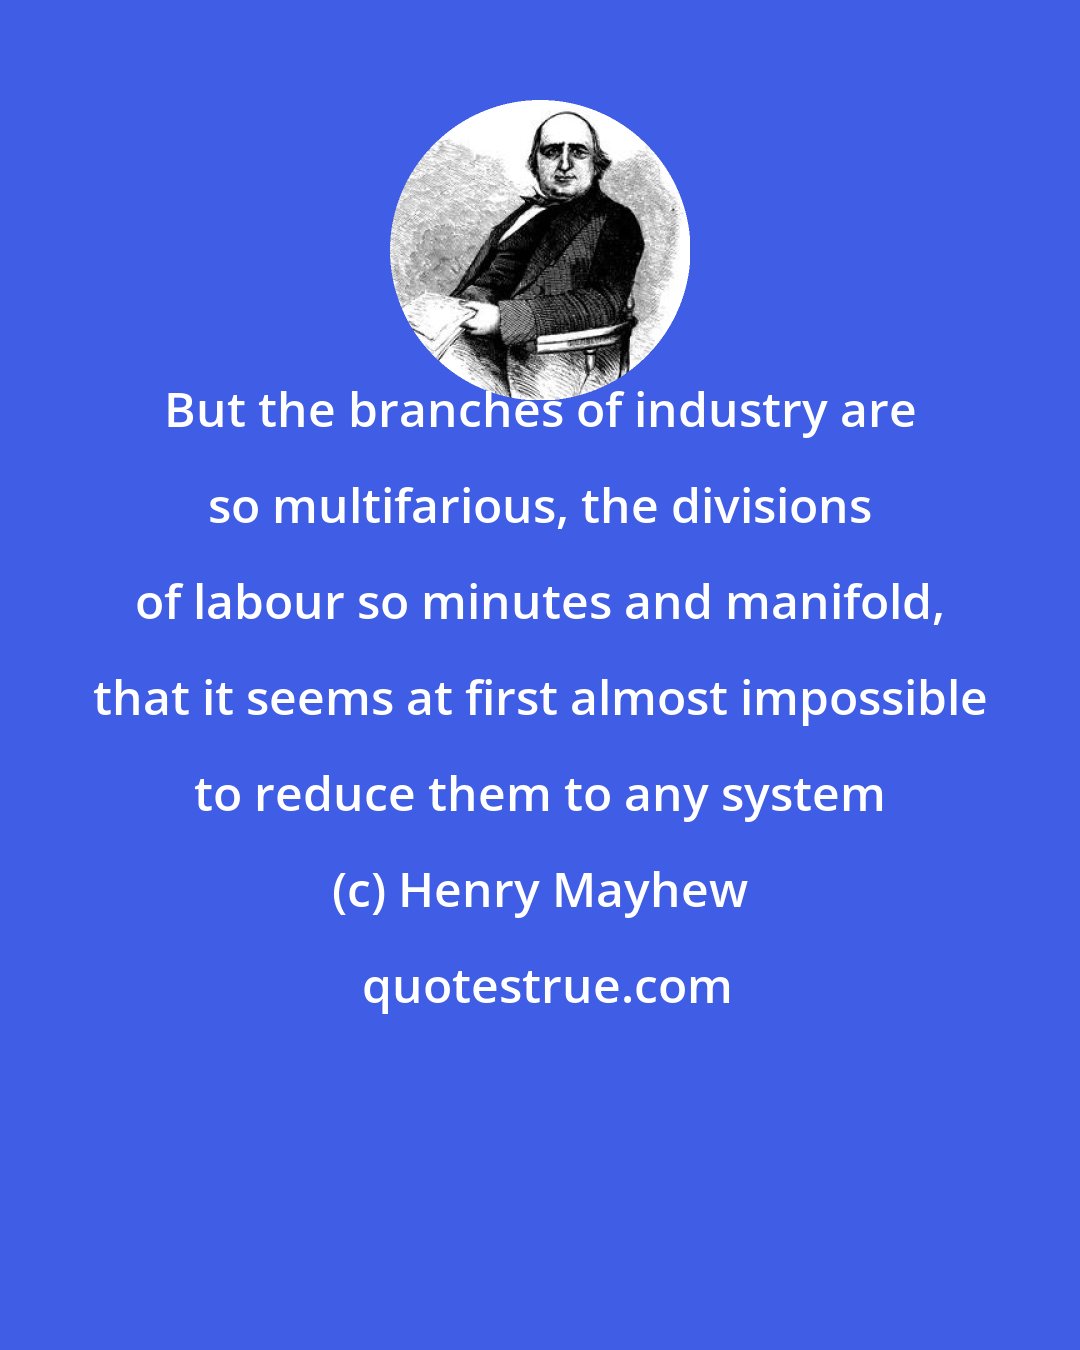 Henry Mayhew: But the branches of industry are so multifarious, the divisions of labour so minutes and manifold, that it seems at first almost impossible to reduce them to any system